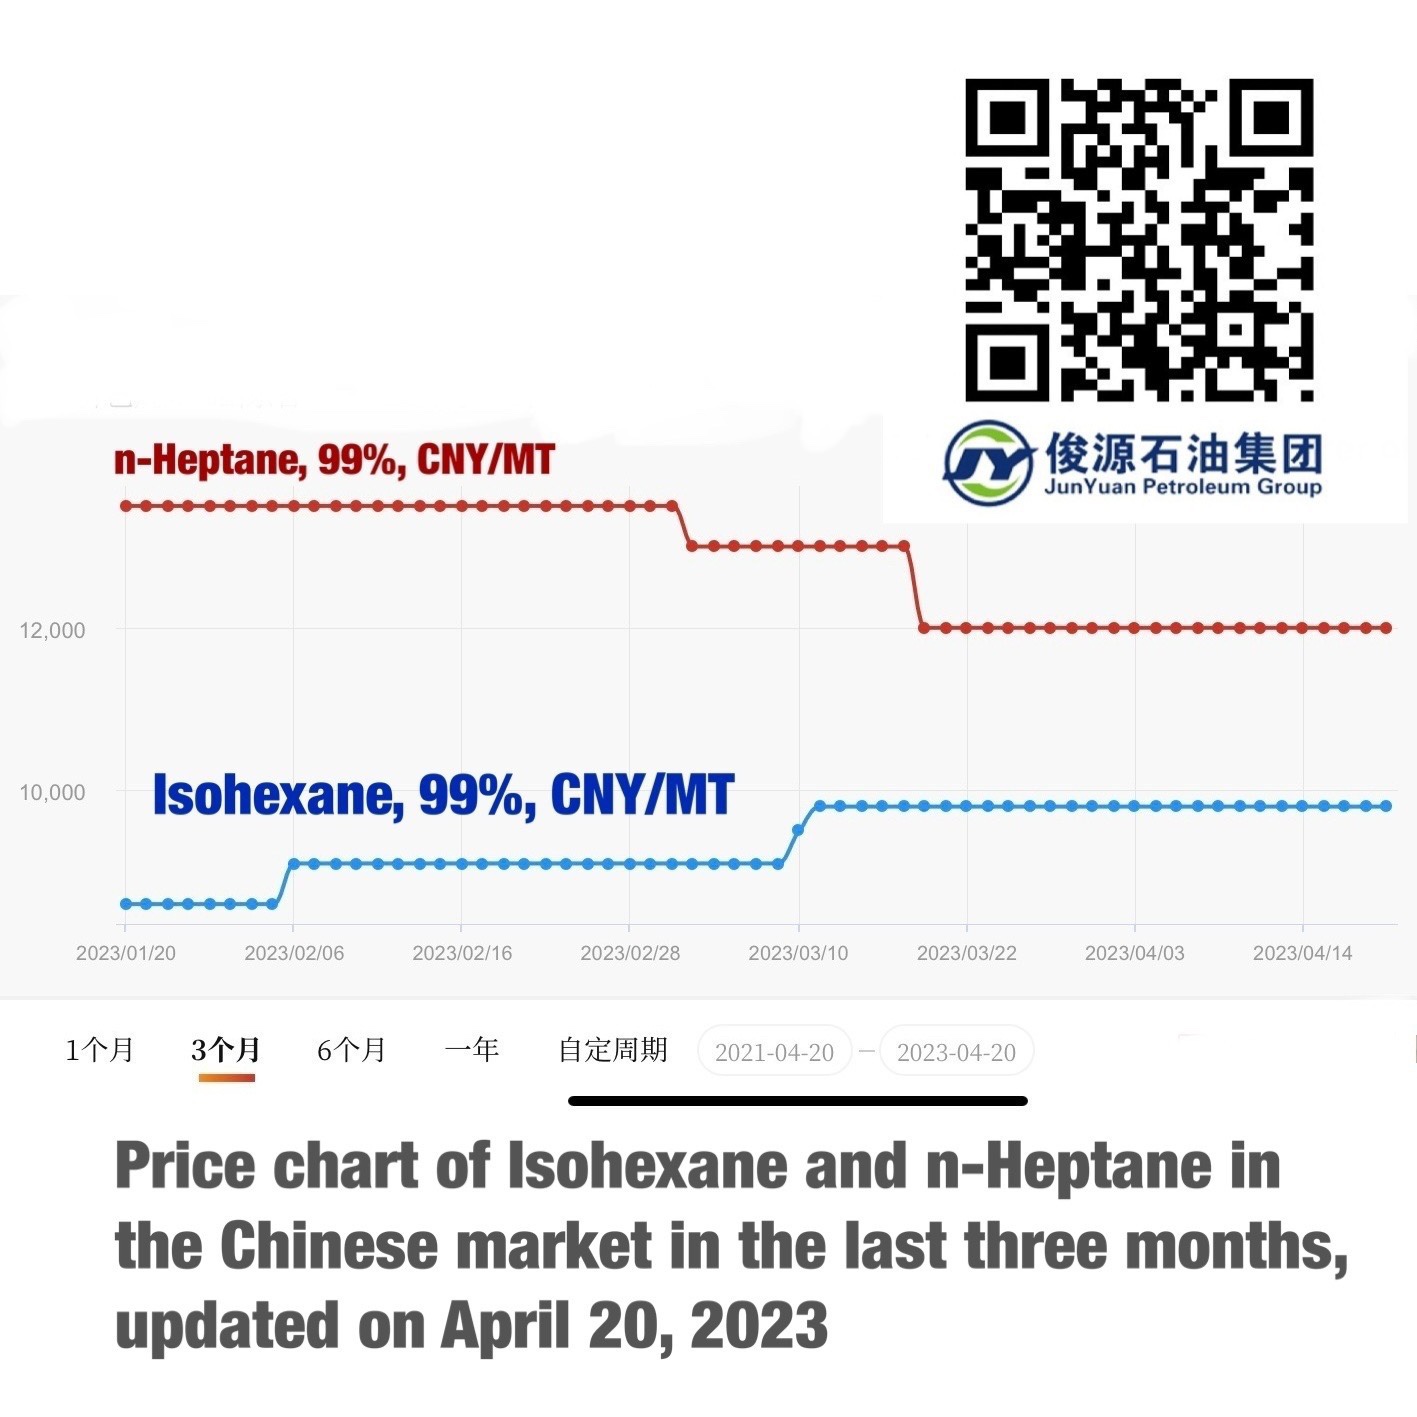 Price chart of isohexane and n-heptane in the Chinese market in the last three months, updated on April 20, 2023